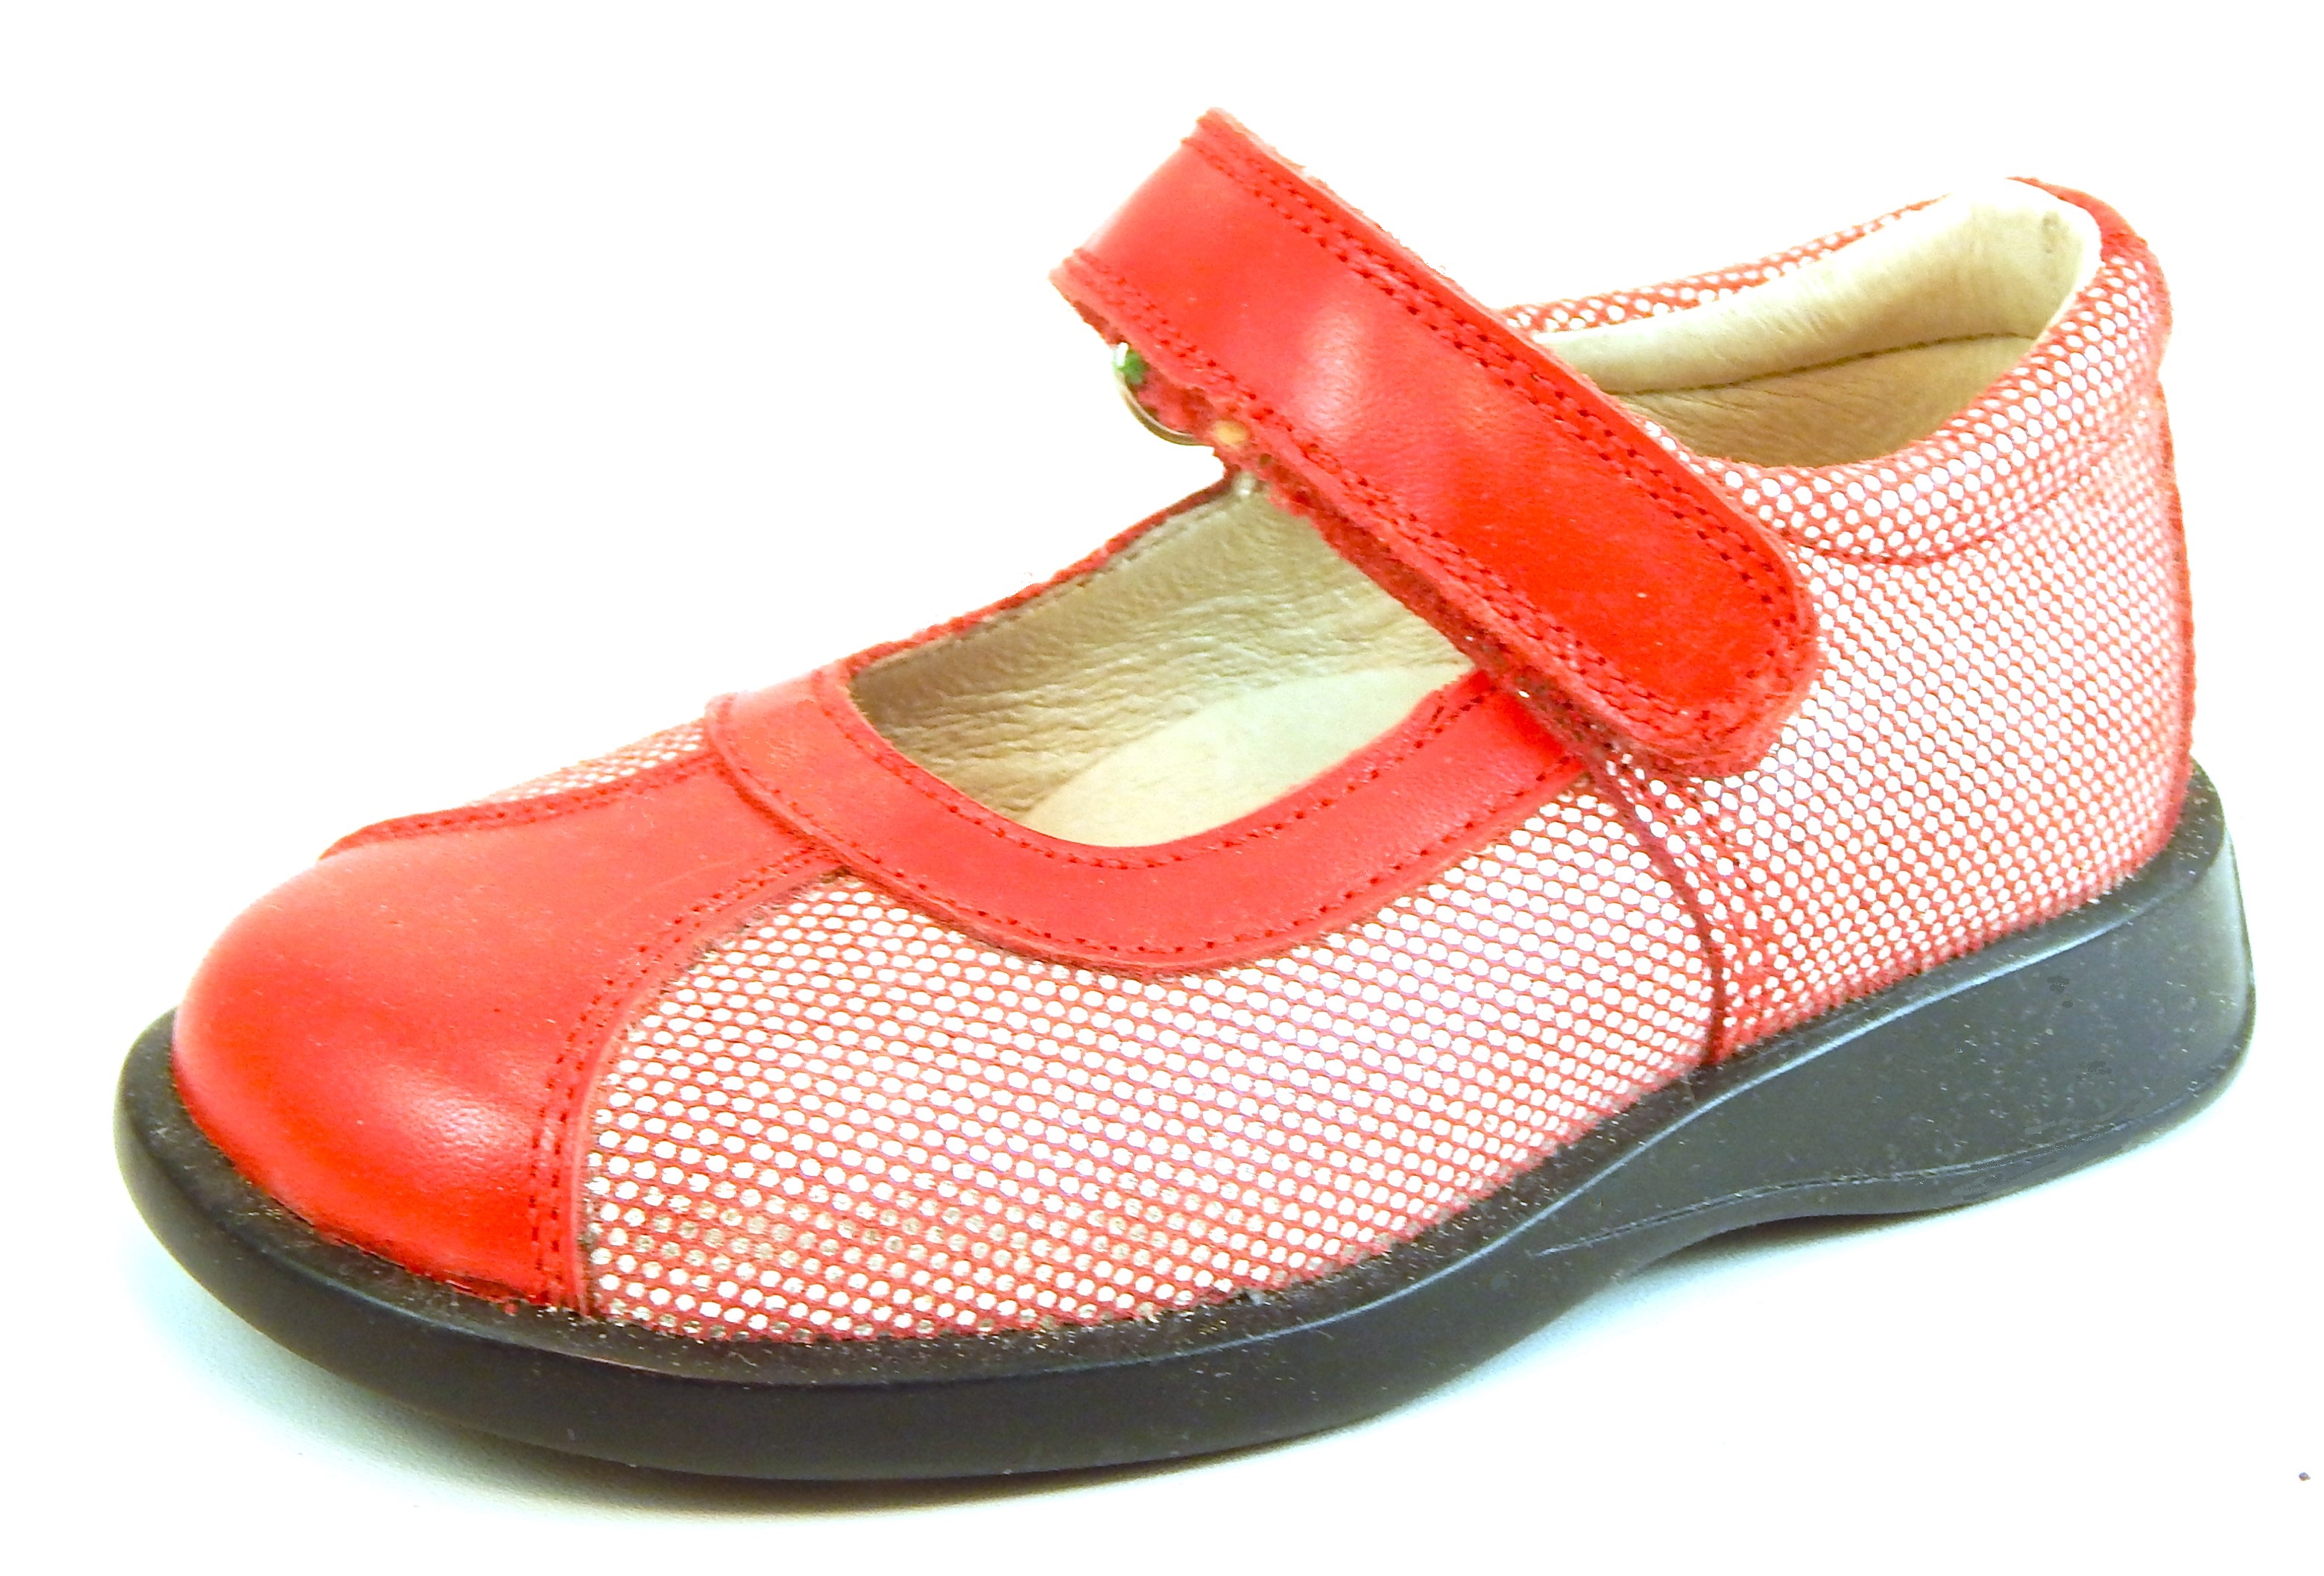 FARO B-6521 - Red Sparkle Mary Janes - Euro 25 Size 8